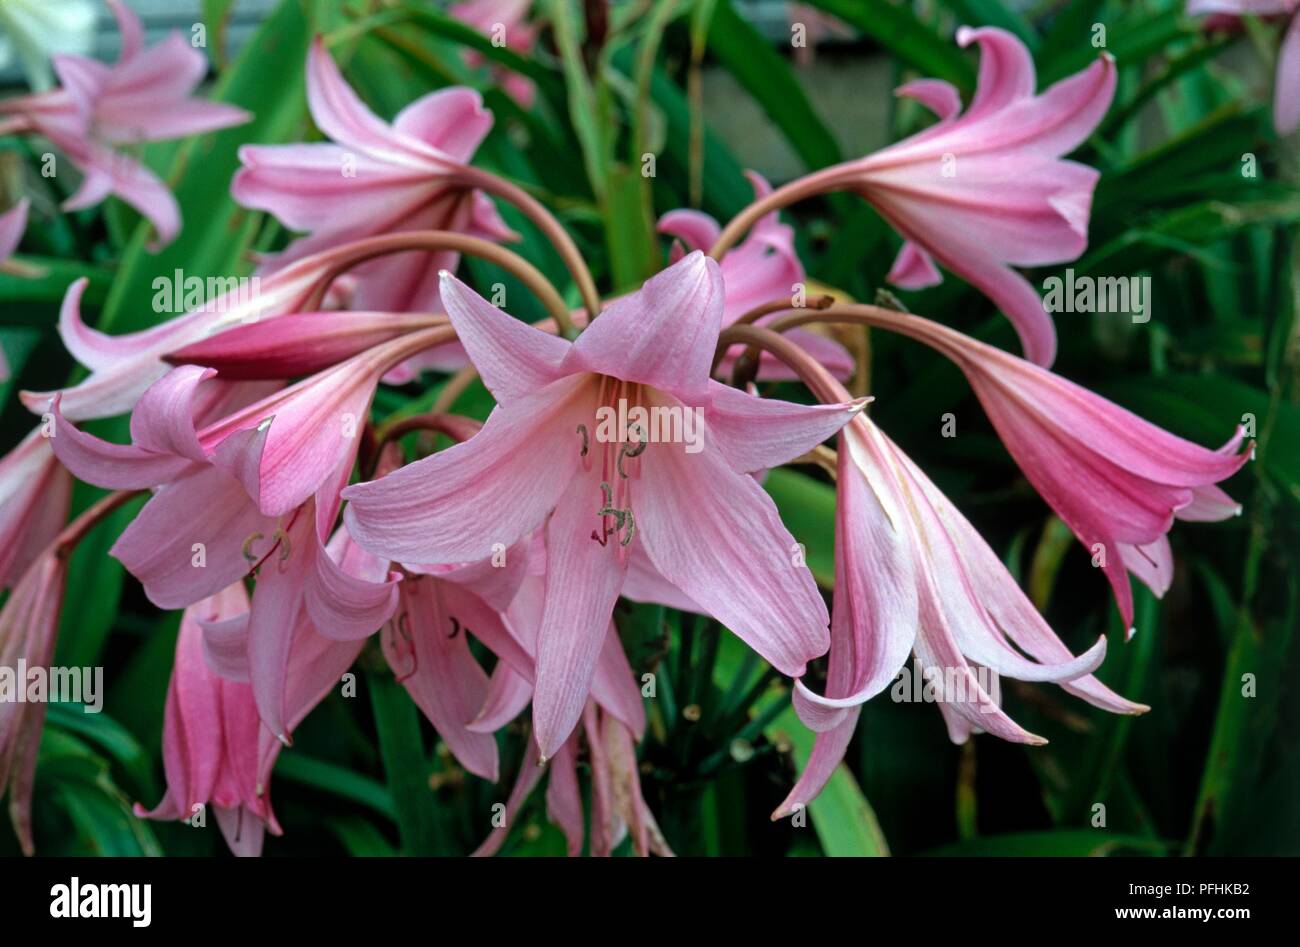 Crinum x powellii, showing pink flowers on drooping stems, close-up Stock Photo